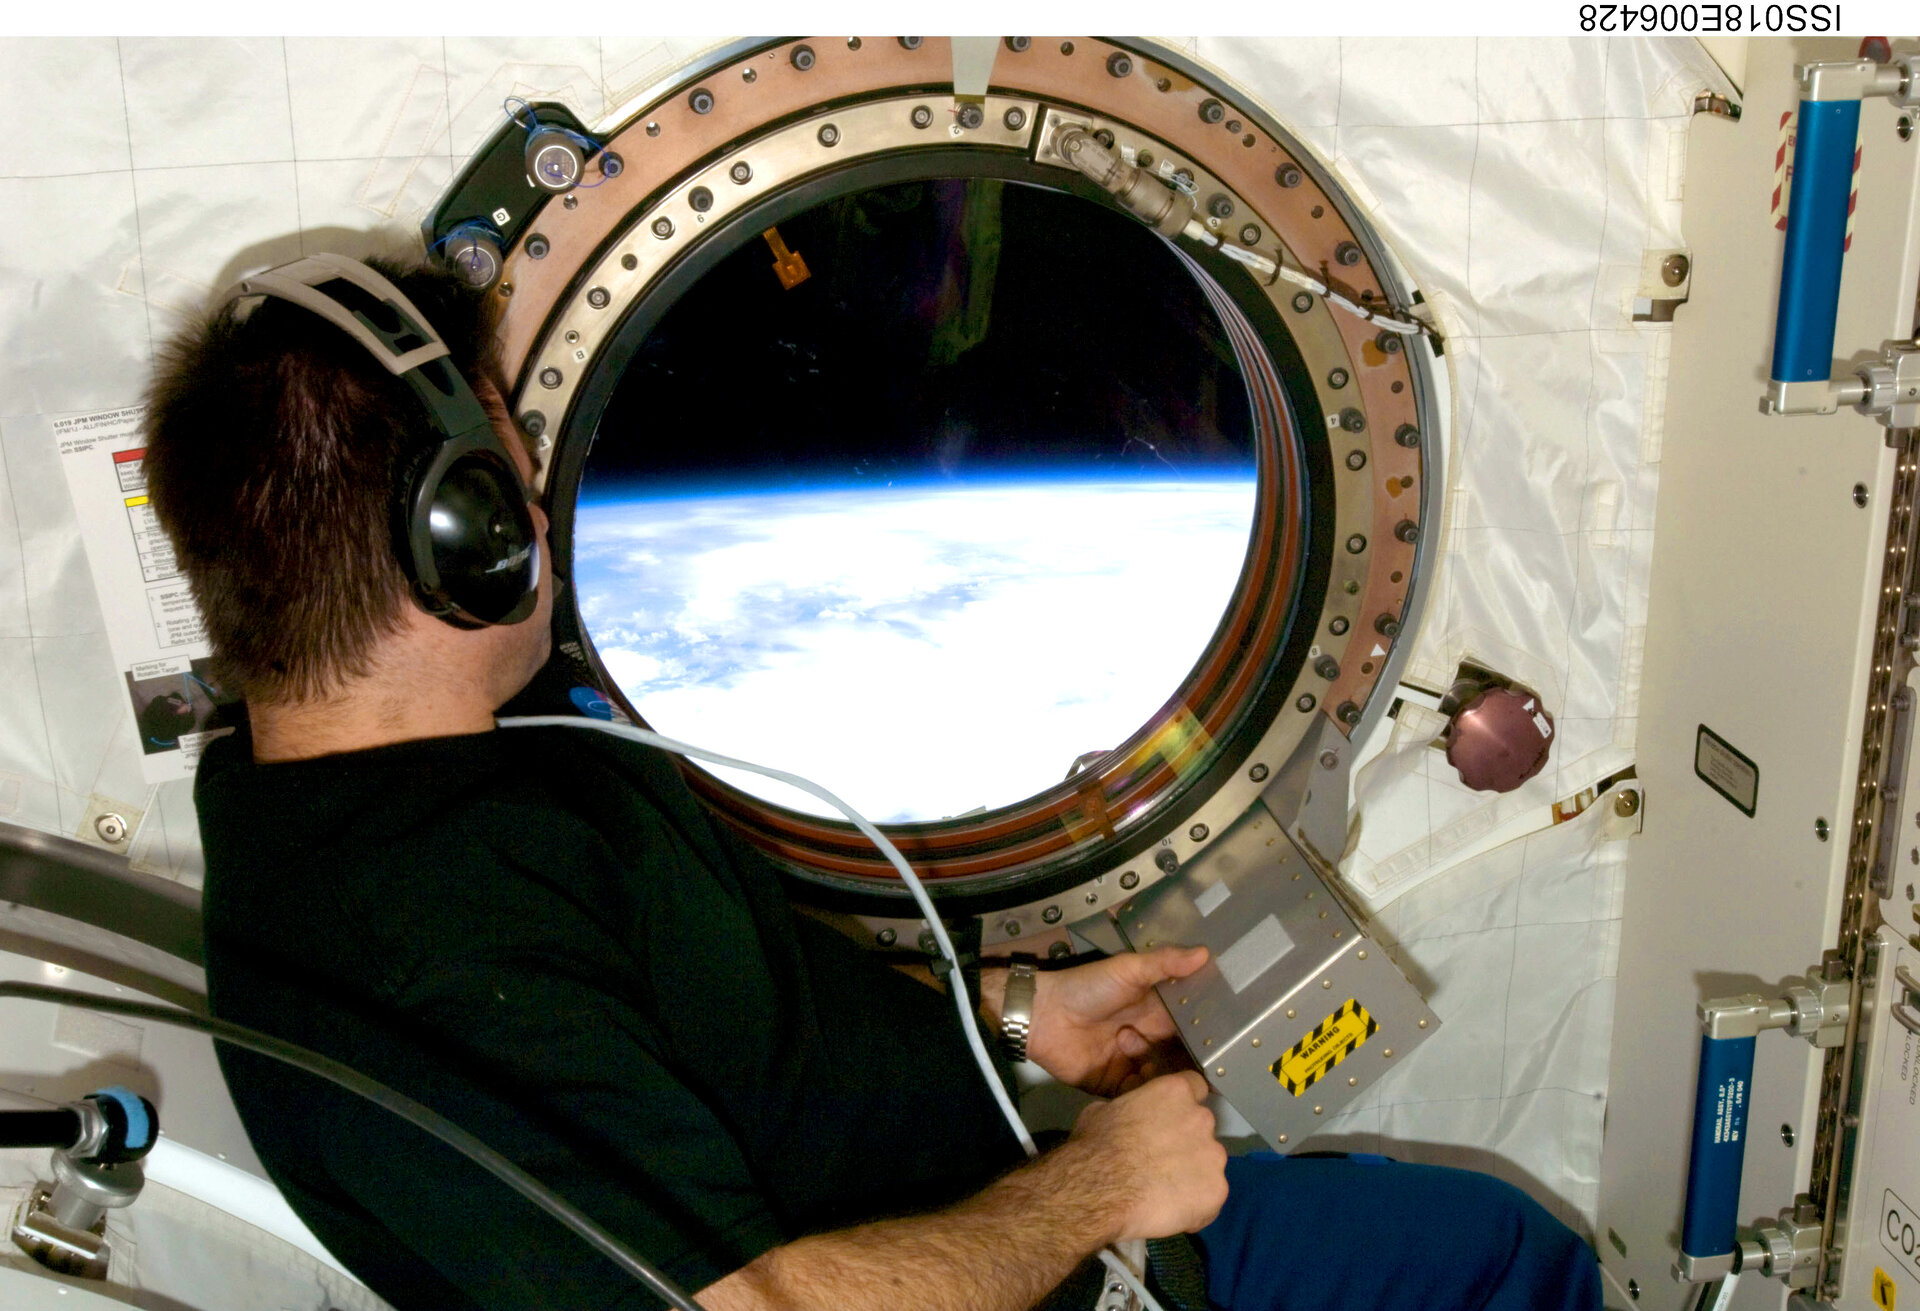 Looking through the window in the Kibo laboratory of the ISS